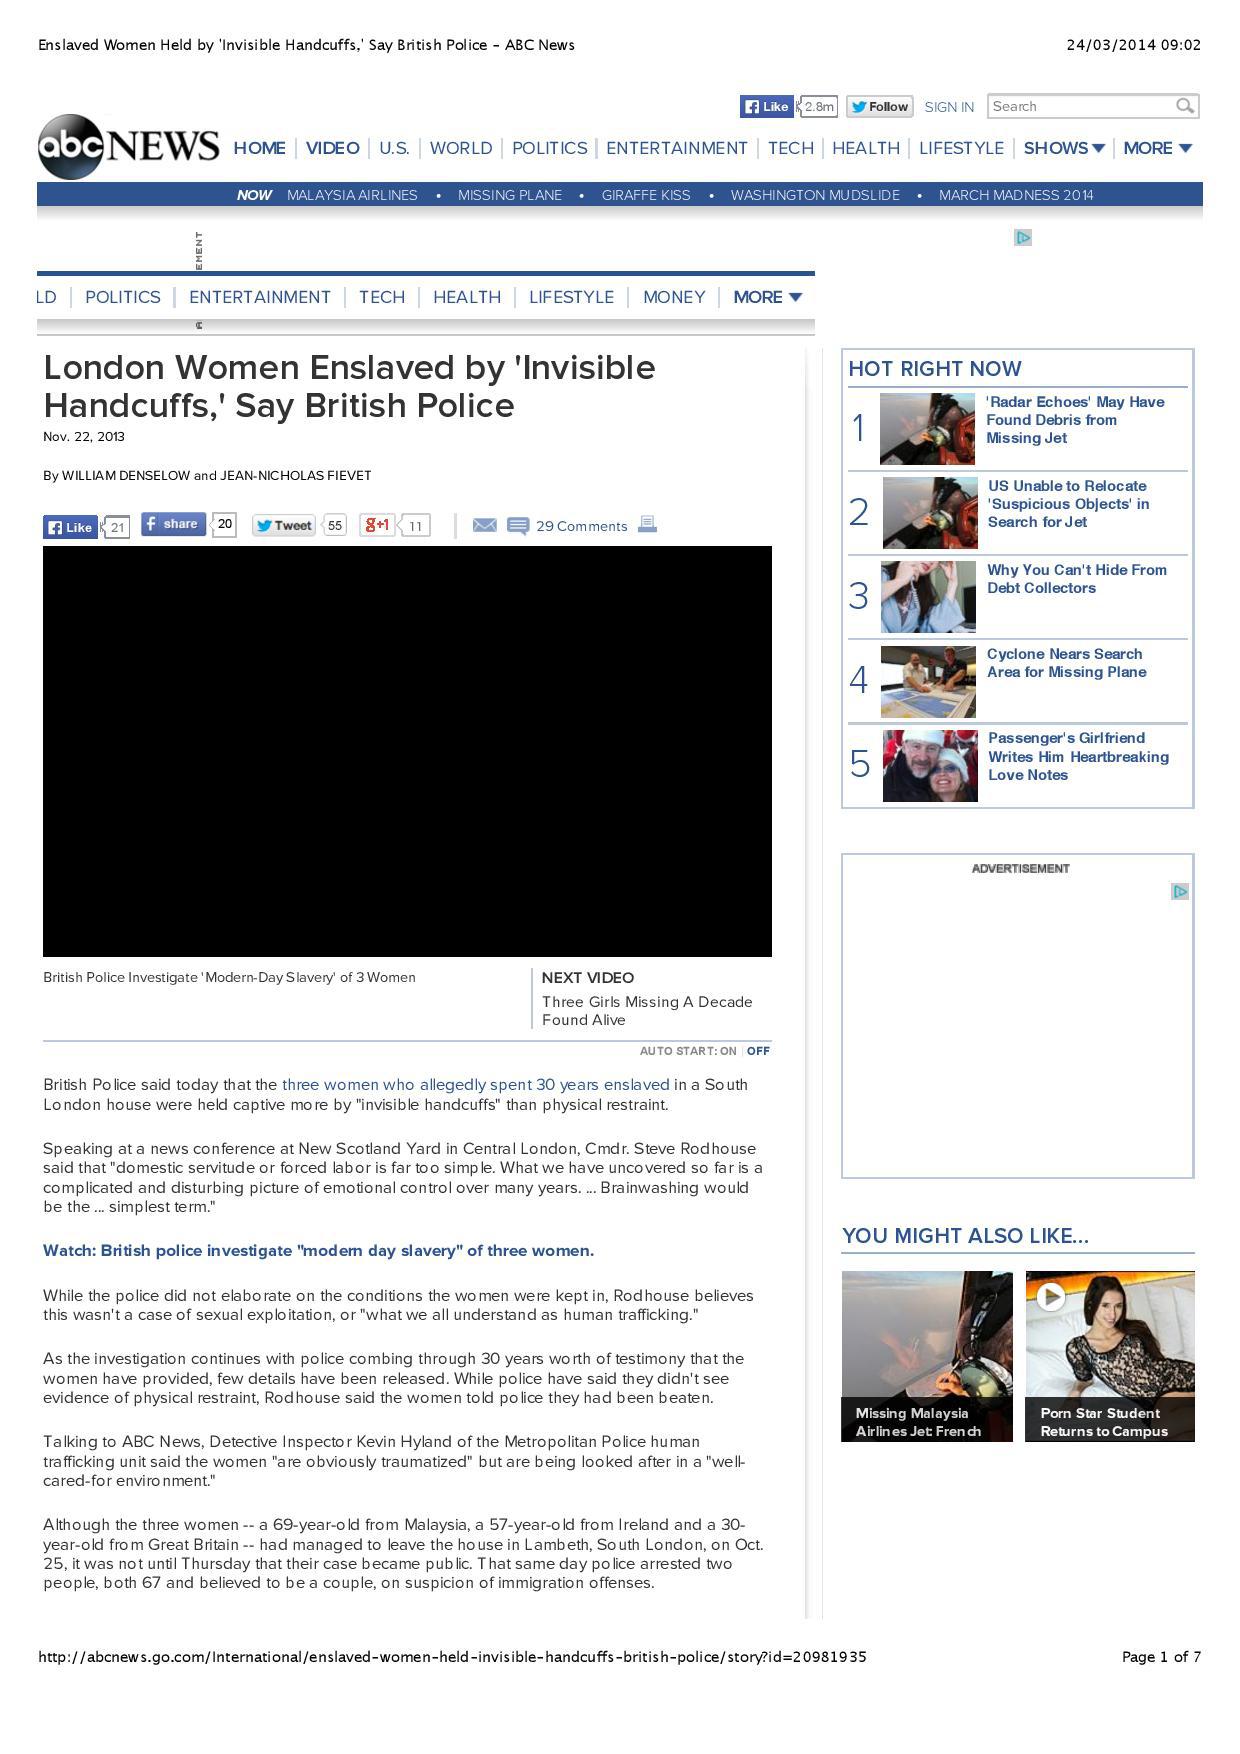 abc-news-enslaved-women-held-by-invisible-handcuffs-say-british-police-abc-news-page-001